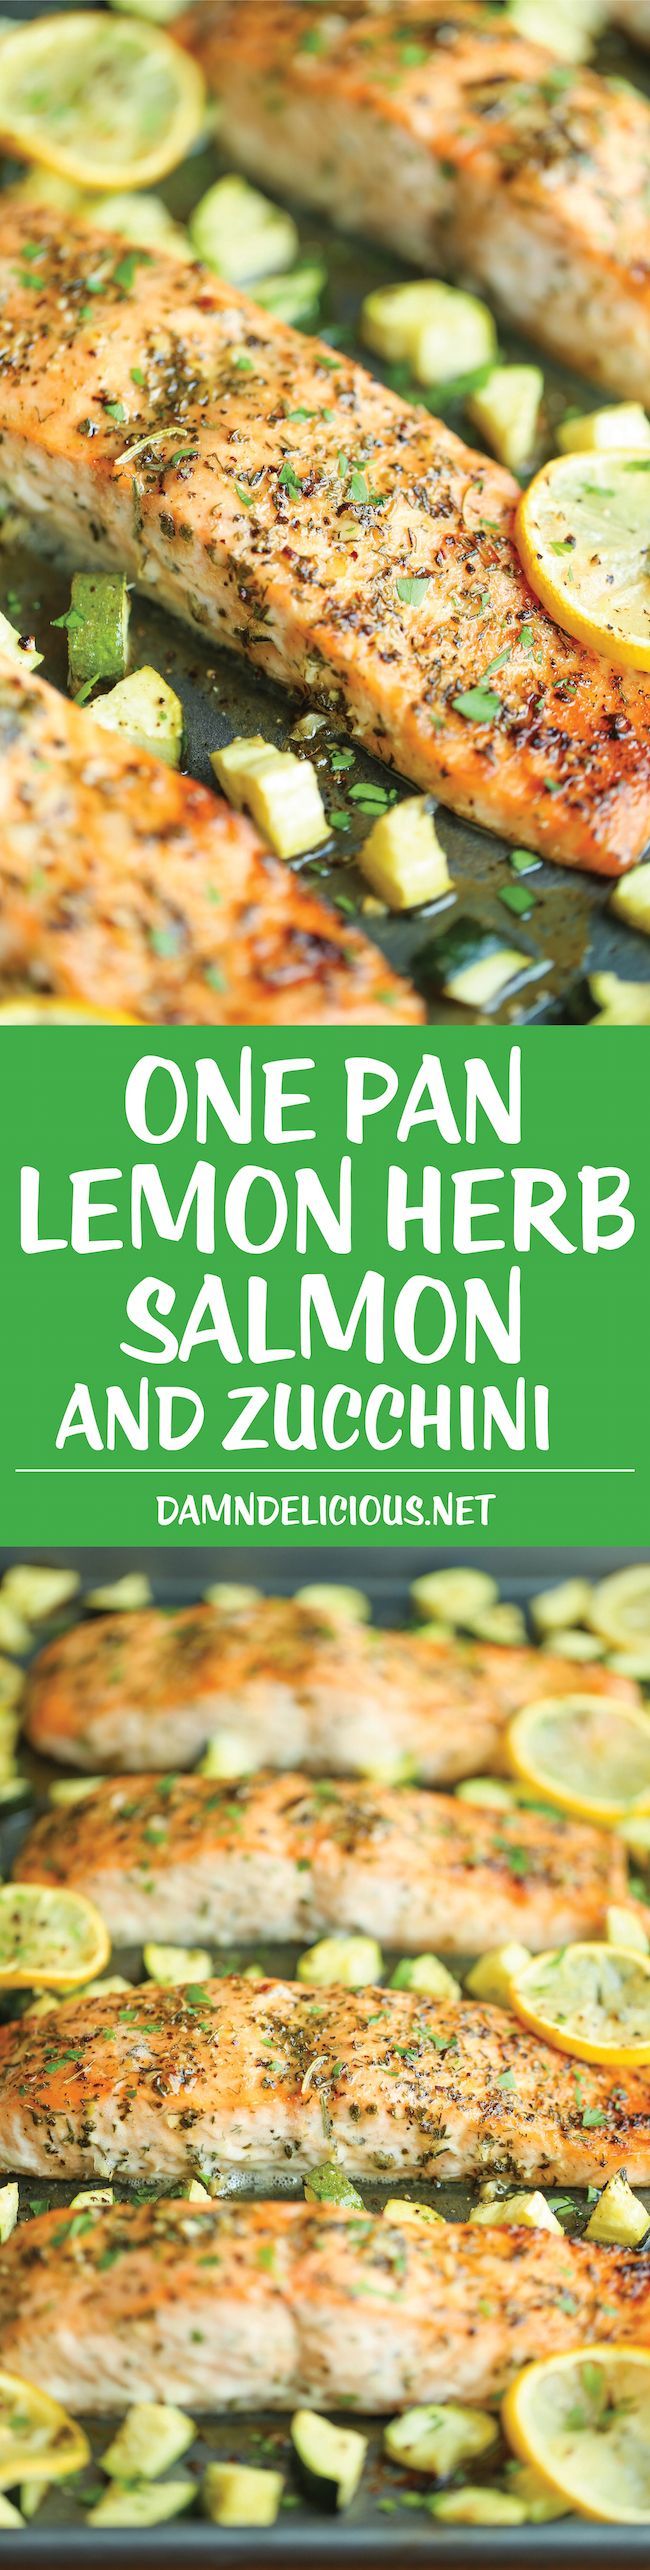 One Pan Lemon Herb Salmon and Zucchini – Quick, easy, and all made on a single pan. And the salmon is pack